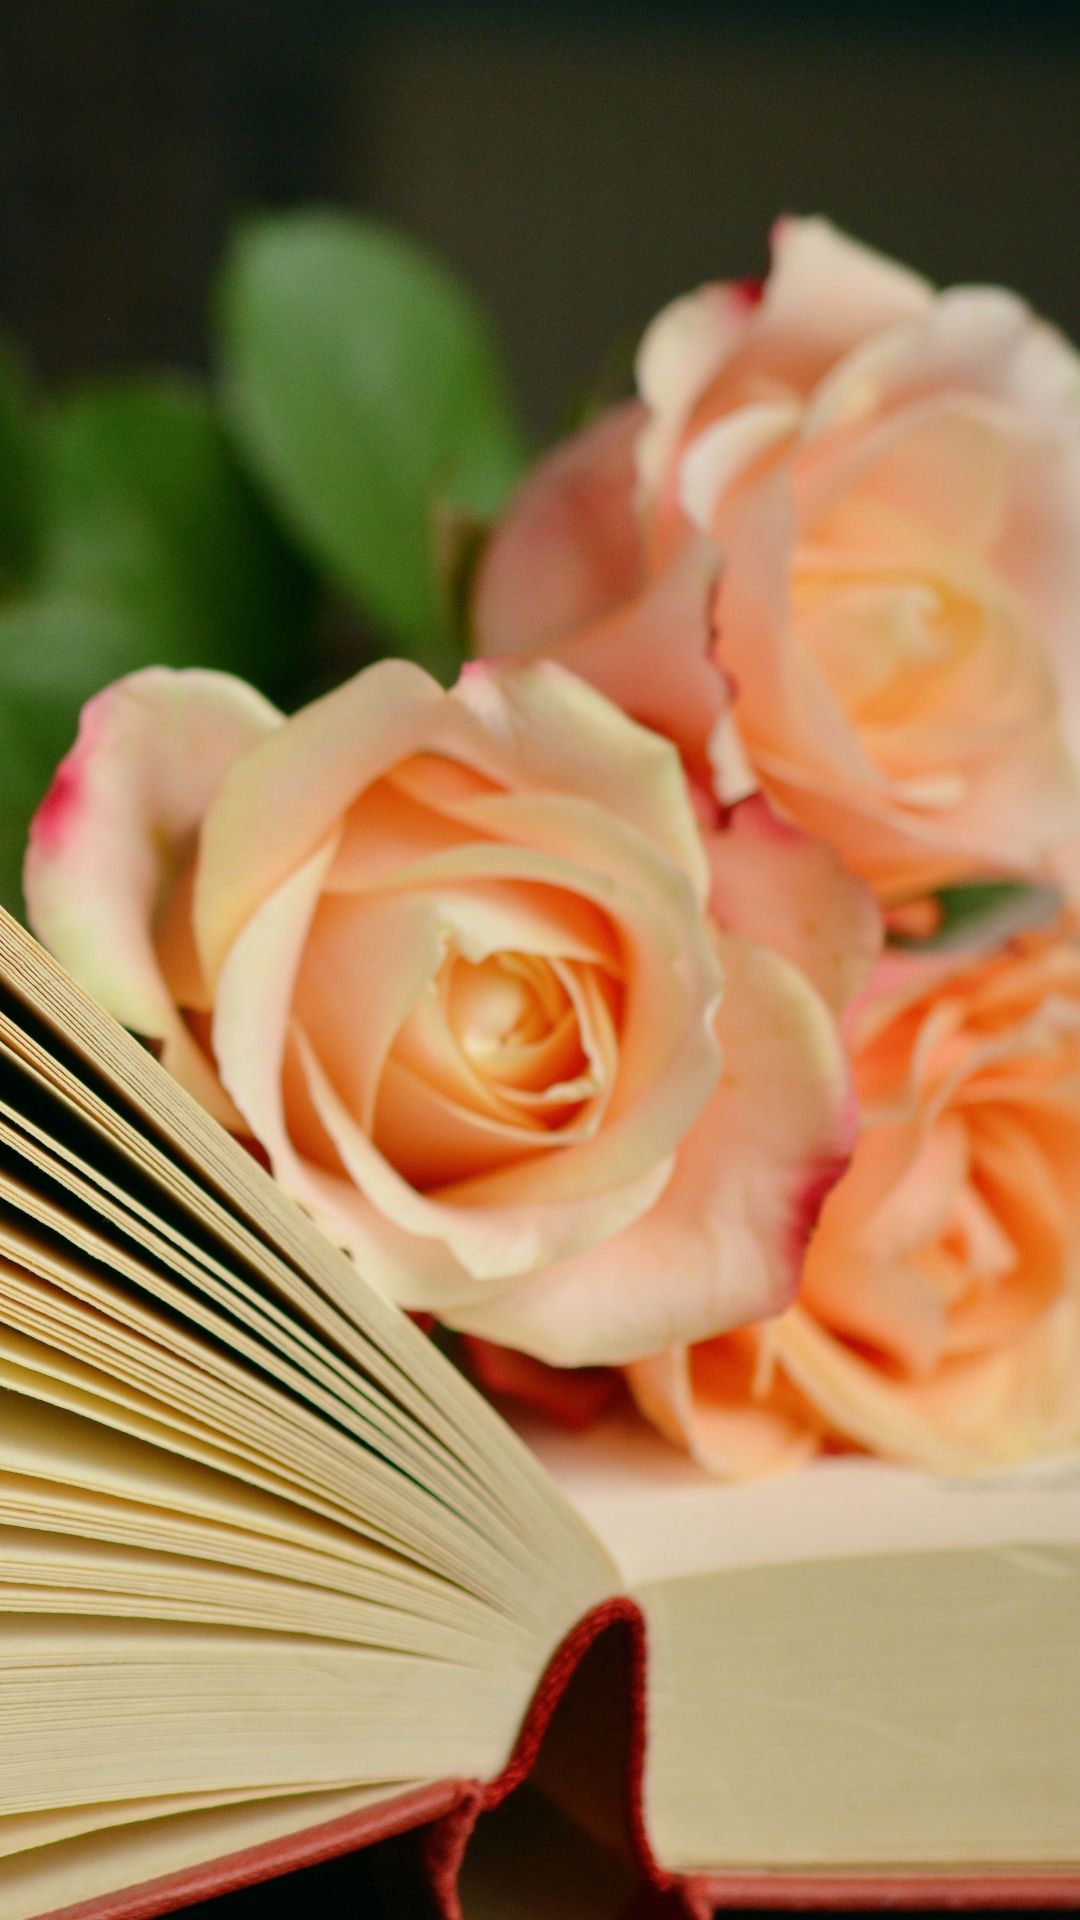 Book Roses Bouquet Reading iPhone 8 Wallpaper Free Download